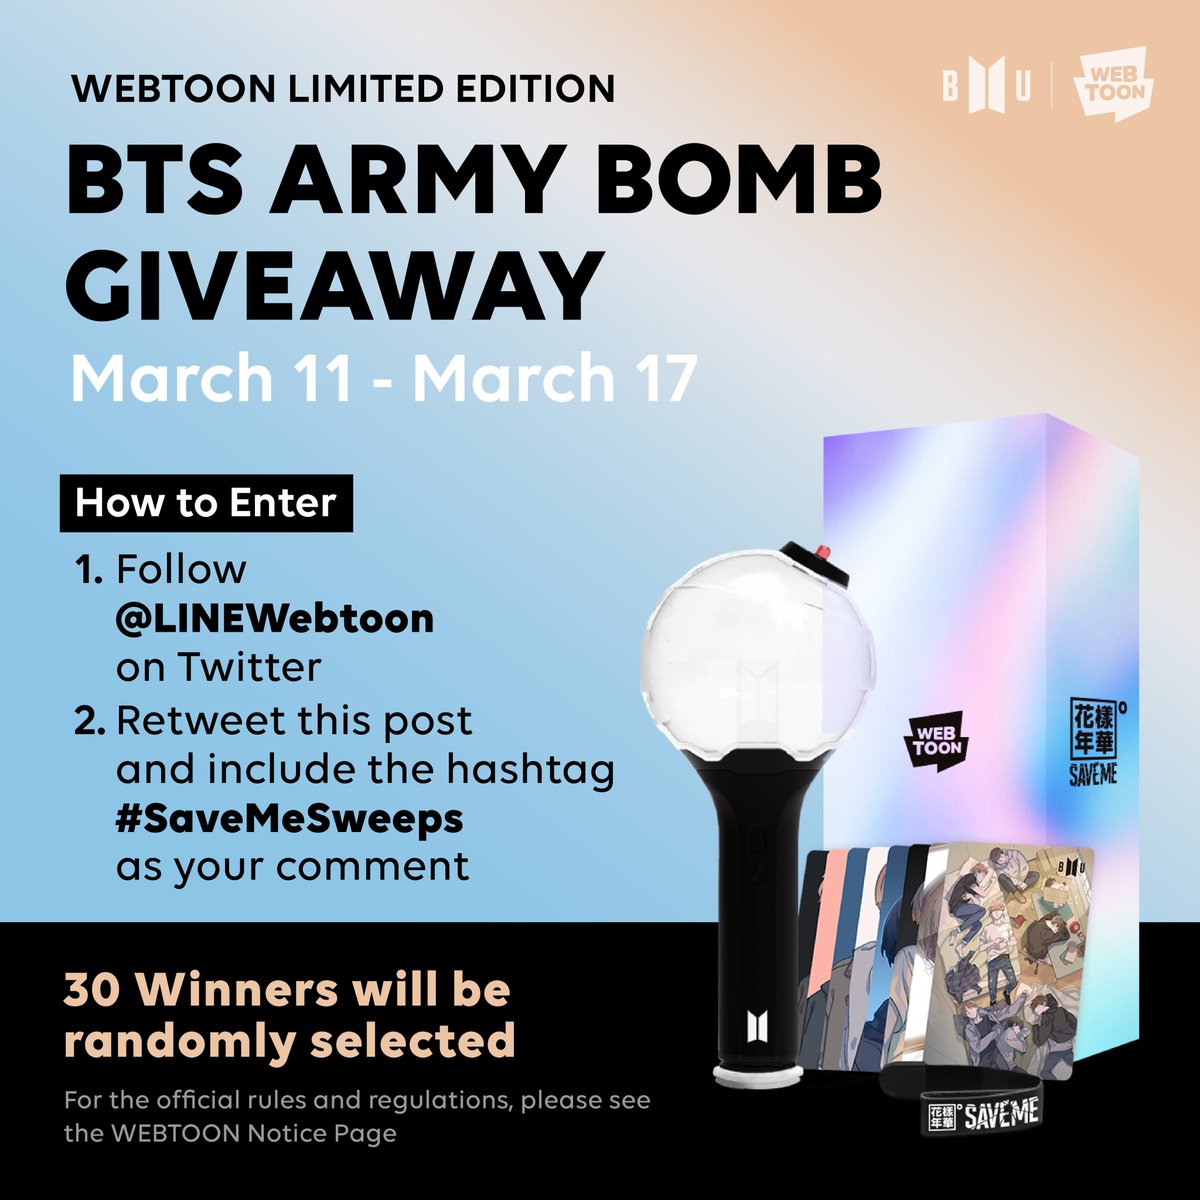 We’re giving away 30 LIMITED EDITION <SAVE ME> BTS Army Bomb Light Sticks! 

For the official rules and regulations: bit.ly/2NYD4jl
 
Good luck! #BU_official #BU_webtoon #SAVEME #BTS_theory #BTS_universe #BTS